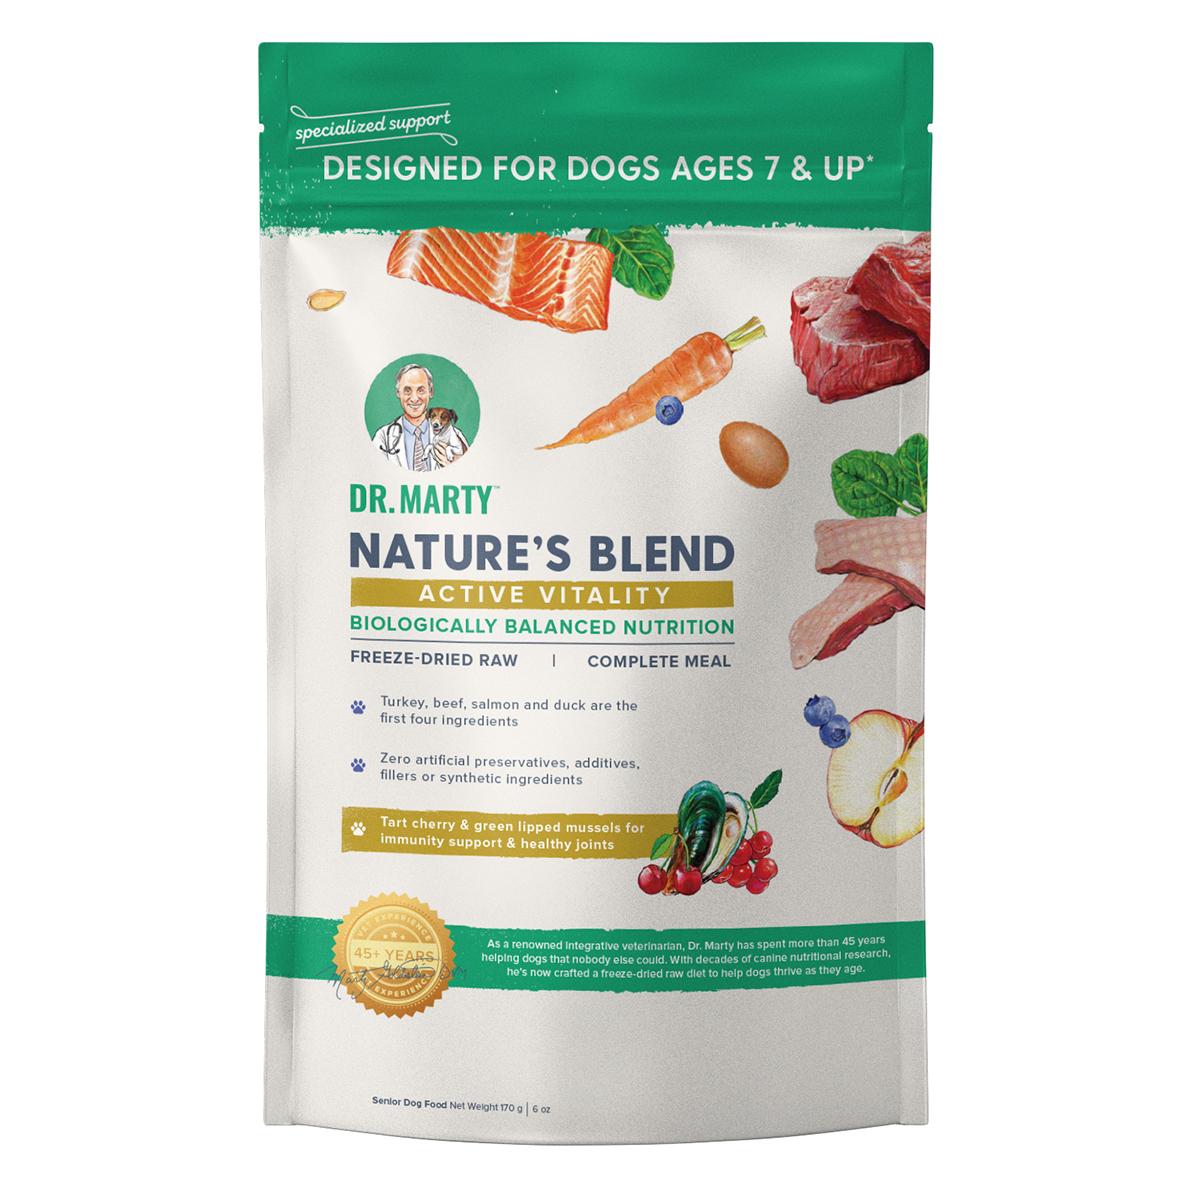 Dr. Marty Nature's Blend Active Vitality for Seniors Freeze-Dried Dog Food